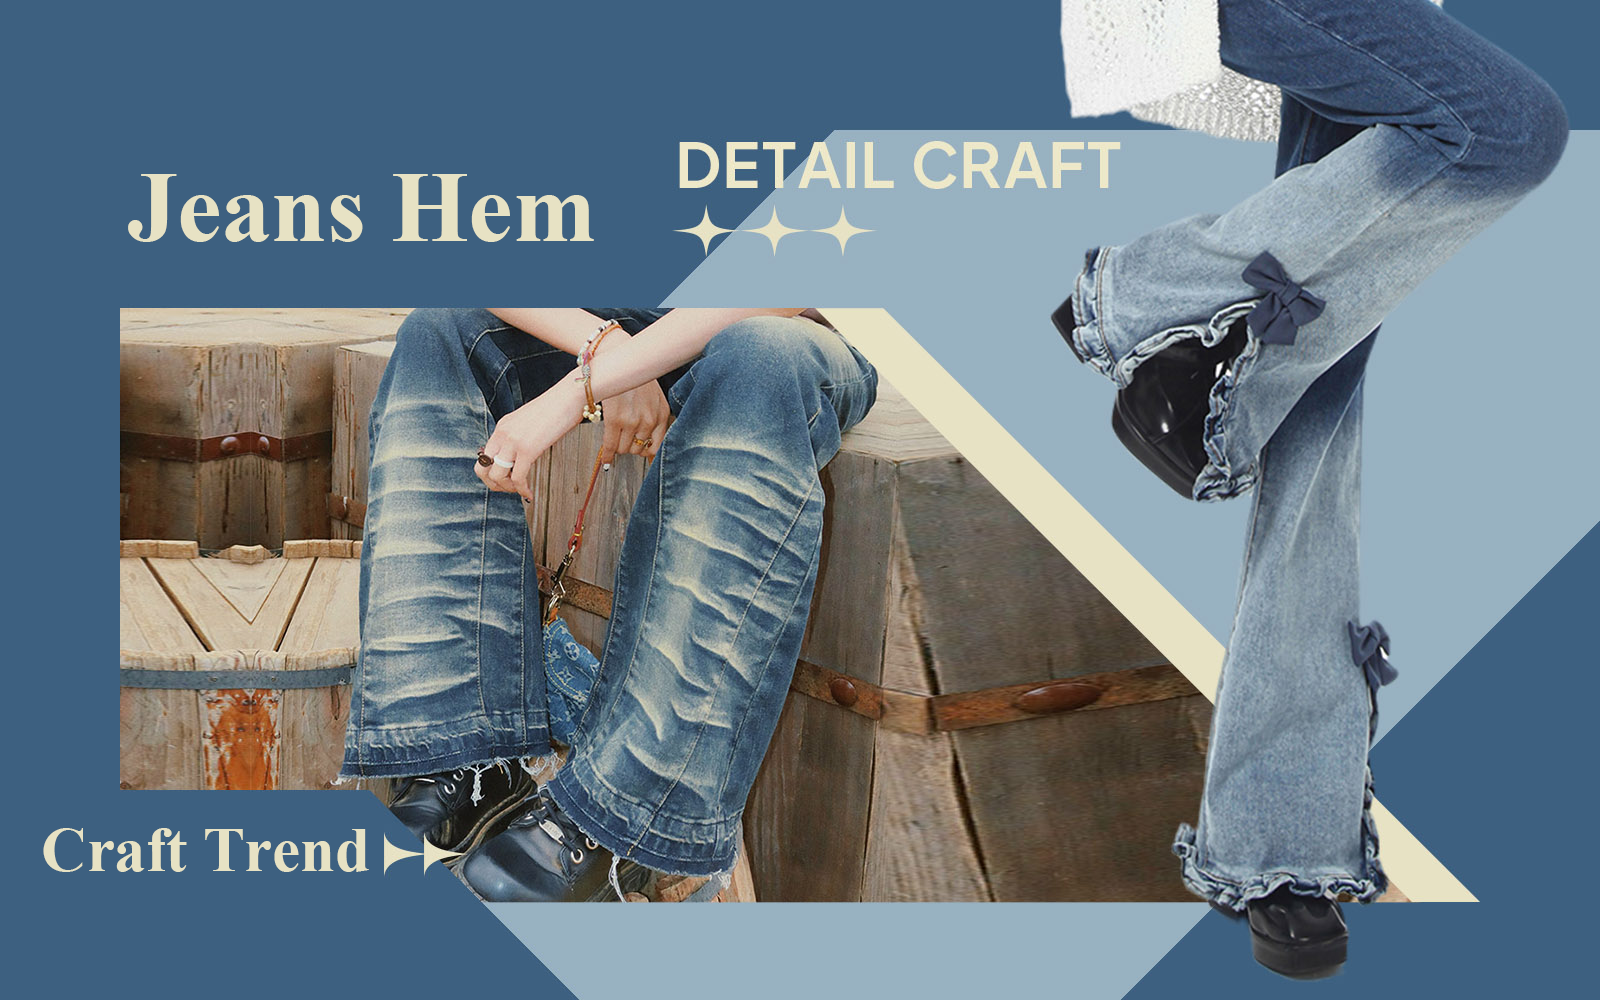 The Detail & Craft Trend for Women's Jeans